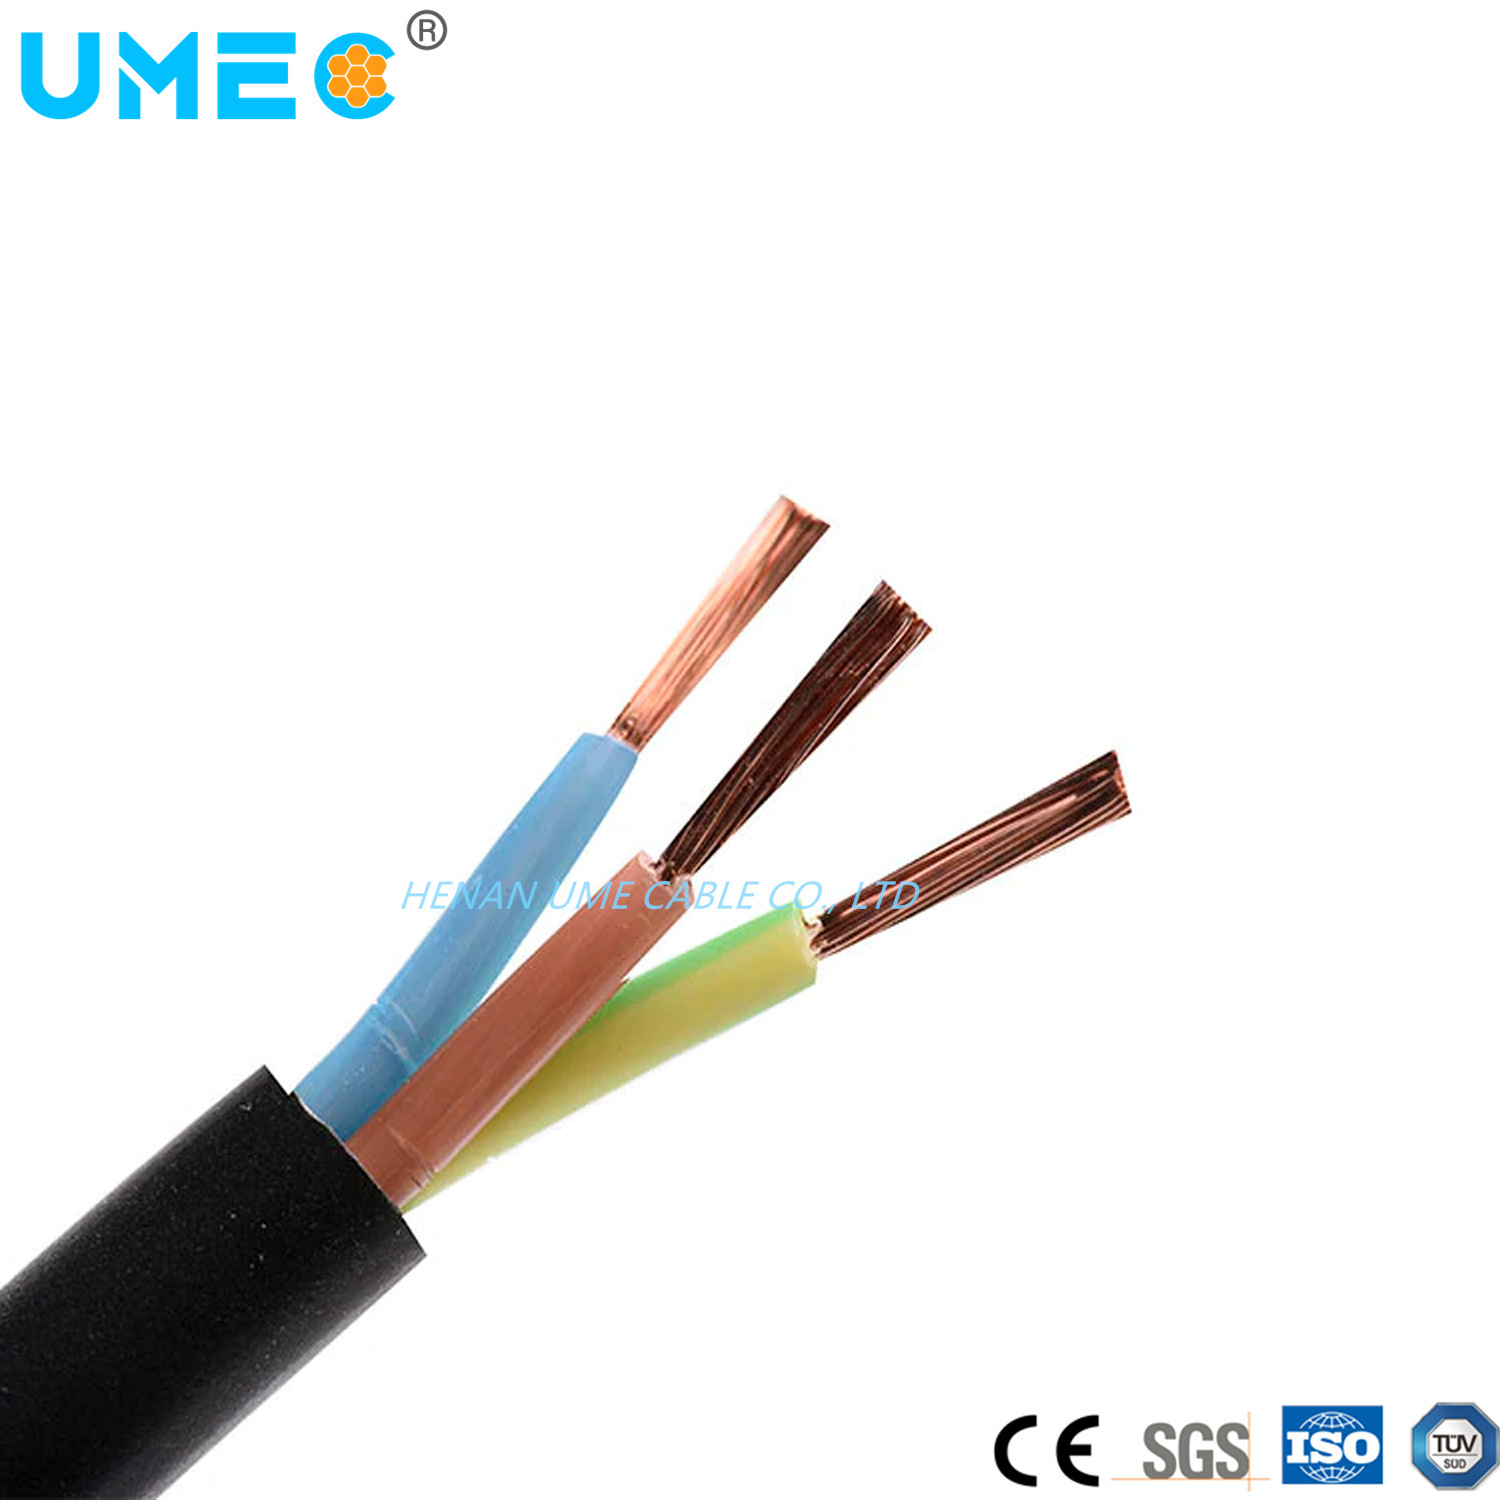 Low Voltage 600V Flexible Multiconductor Thhn Tsj Cable Thermoplastic Insulation with Nylon Tsj/Tsj-N Wire Cable